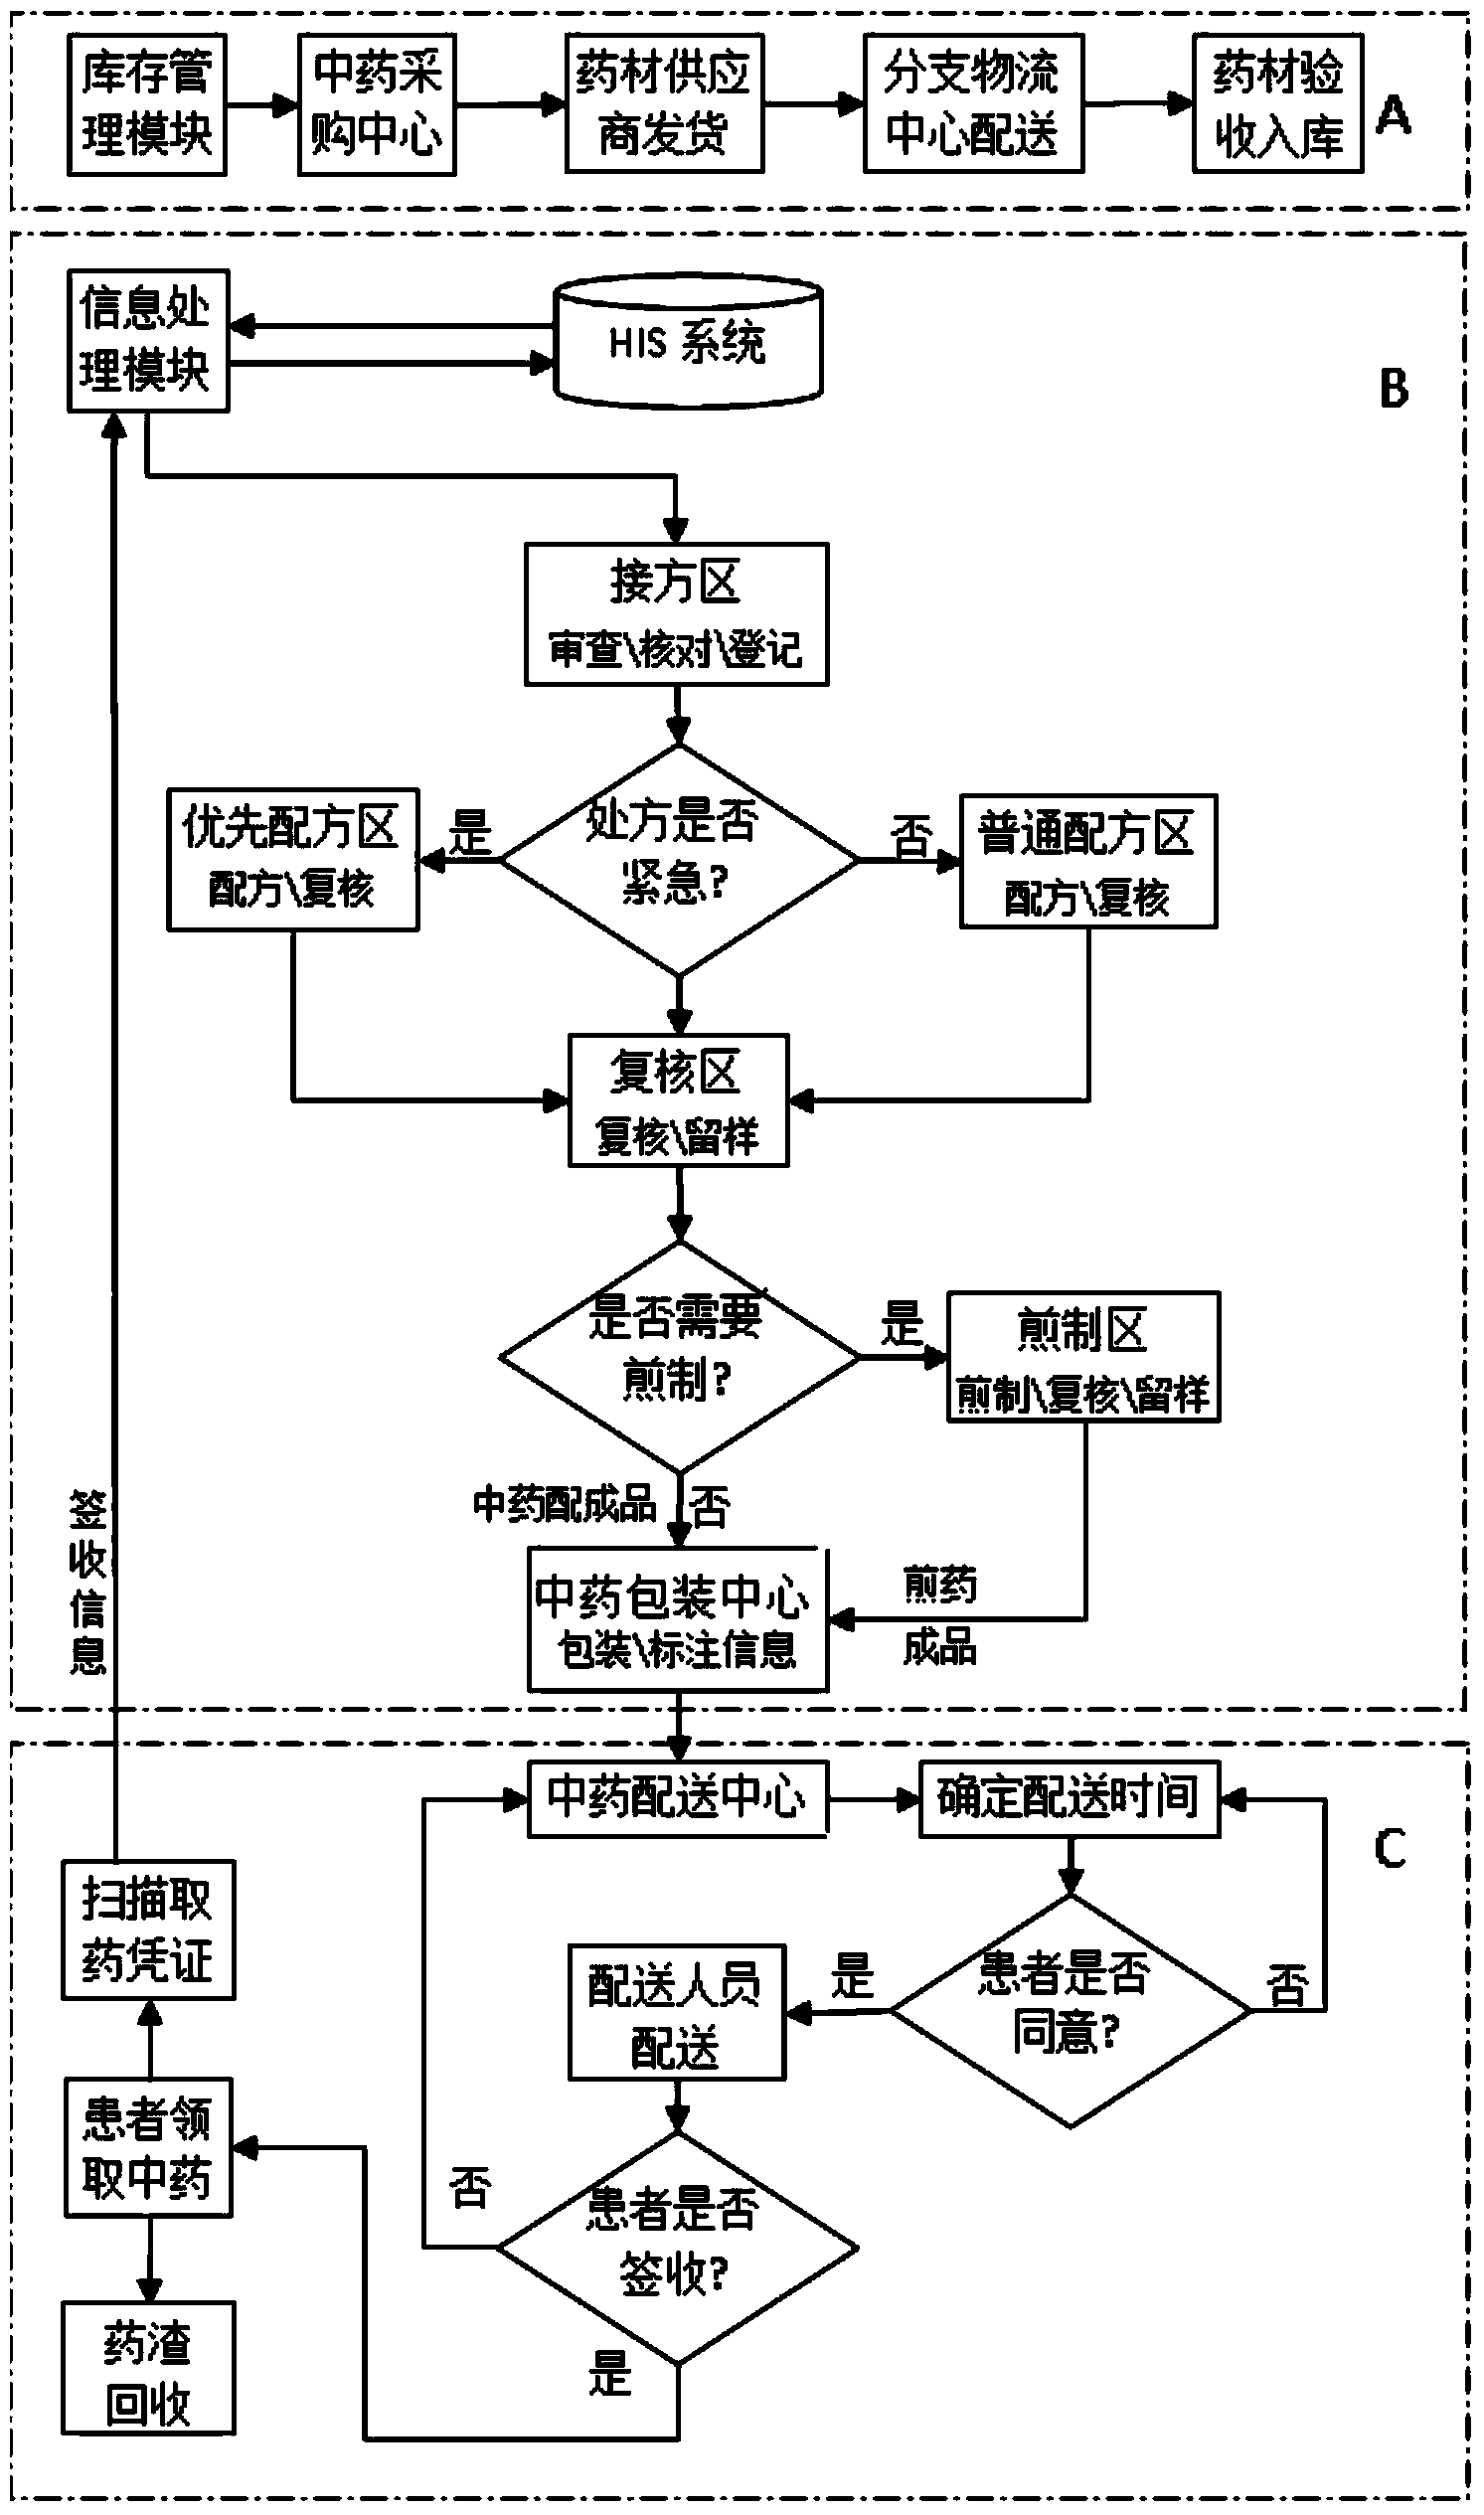 Method for hospital traditional Chinese medicine distribution service based on SPD